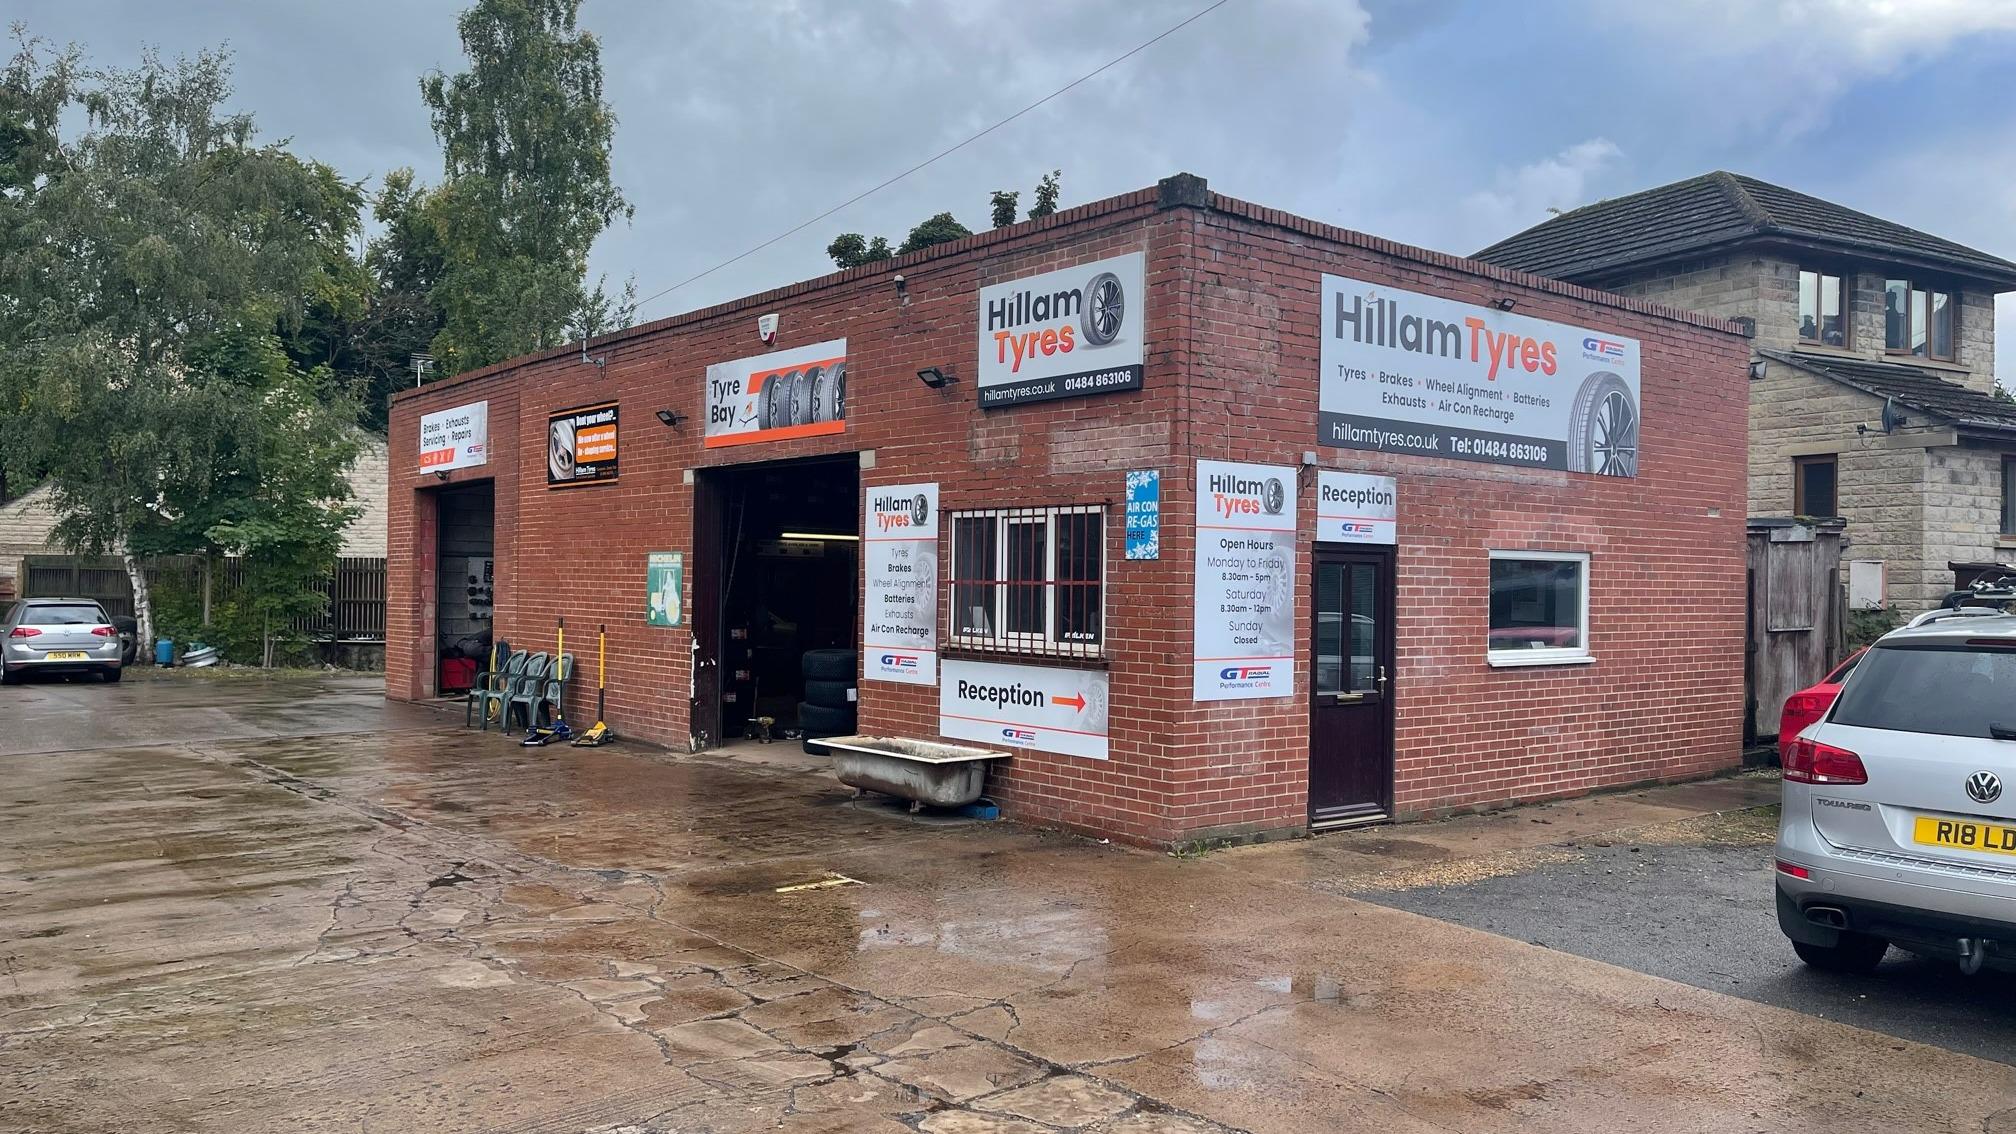 Hillam Tyres Limited -  Huddersfield - Tyres Hillam Tyres Limited Huddersfield 01484 863106